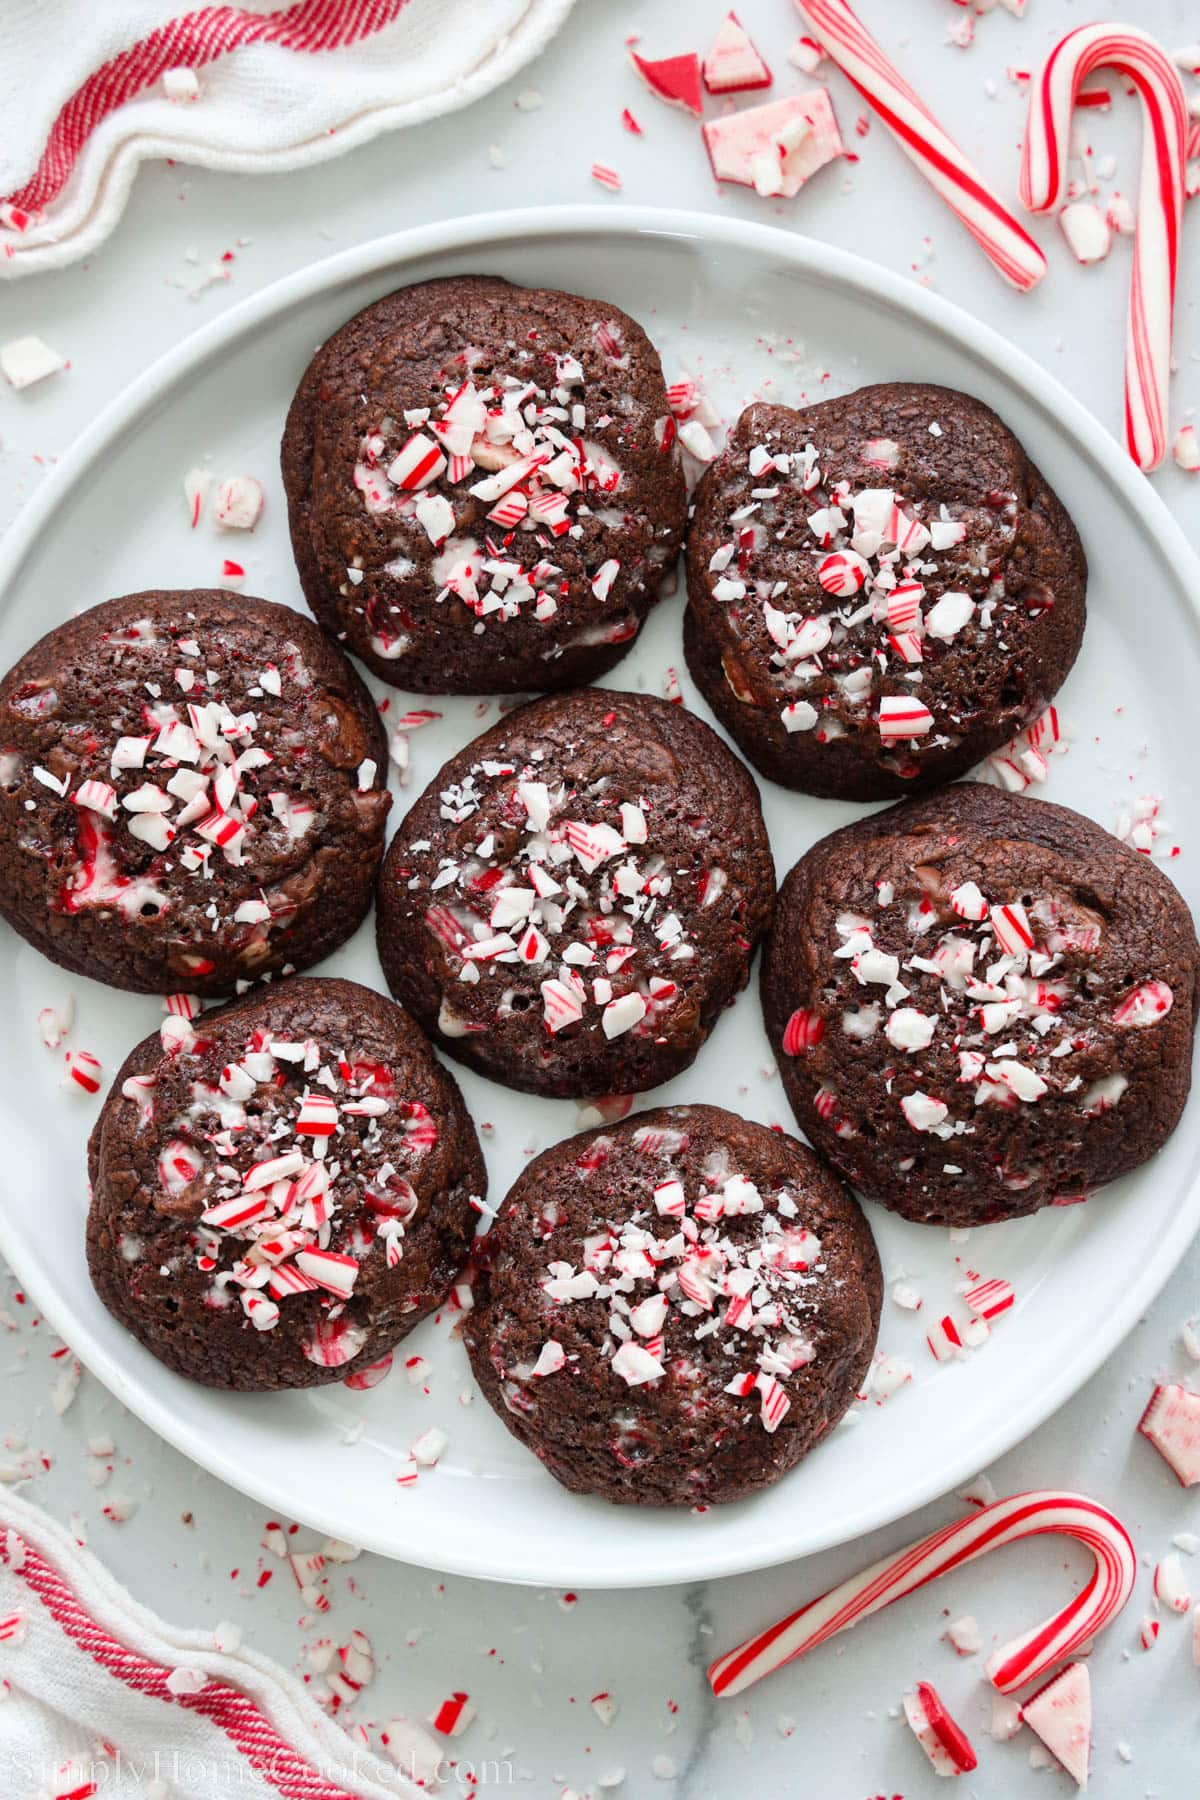 Plate of Chocolate Peppermint Cookies with candy canes nearby.